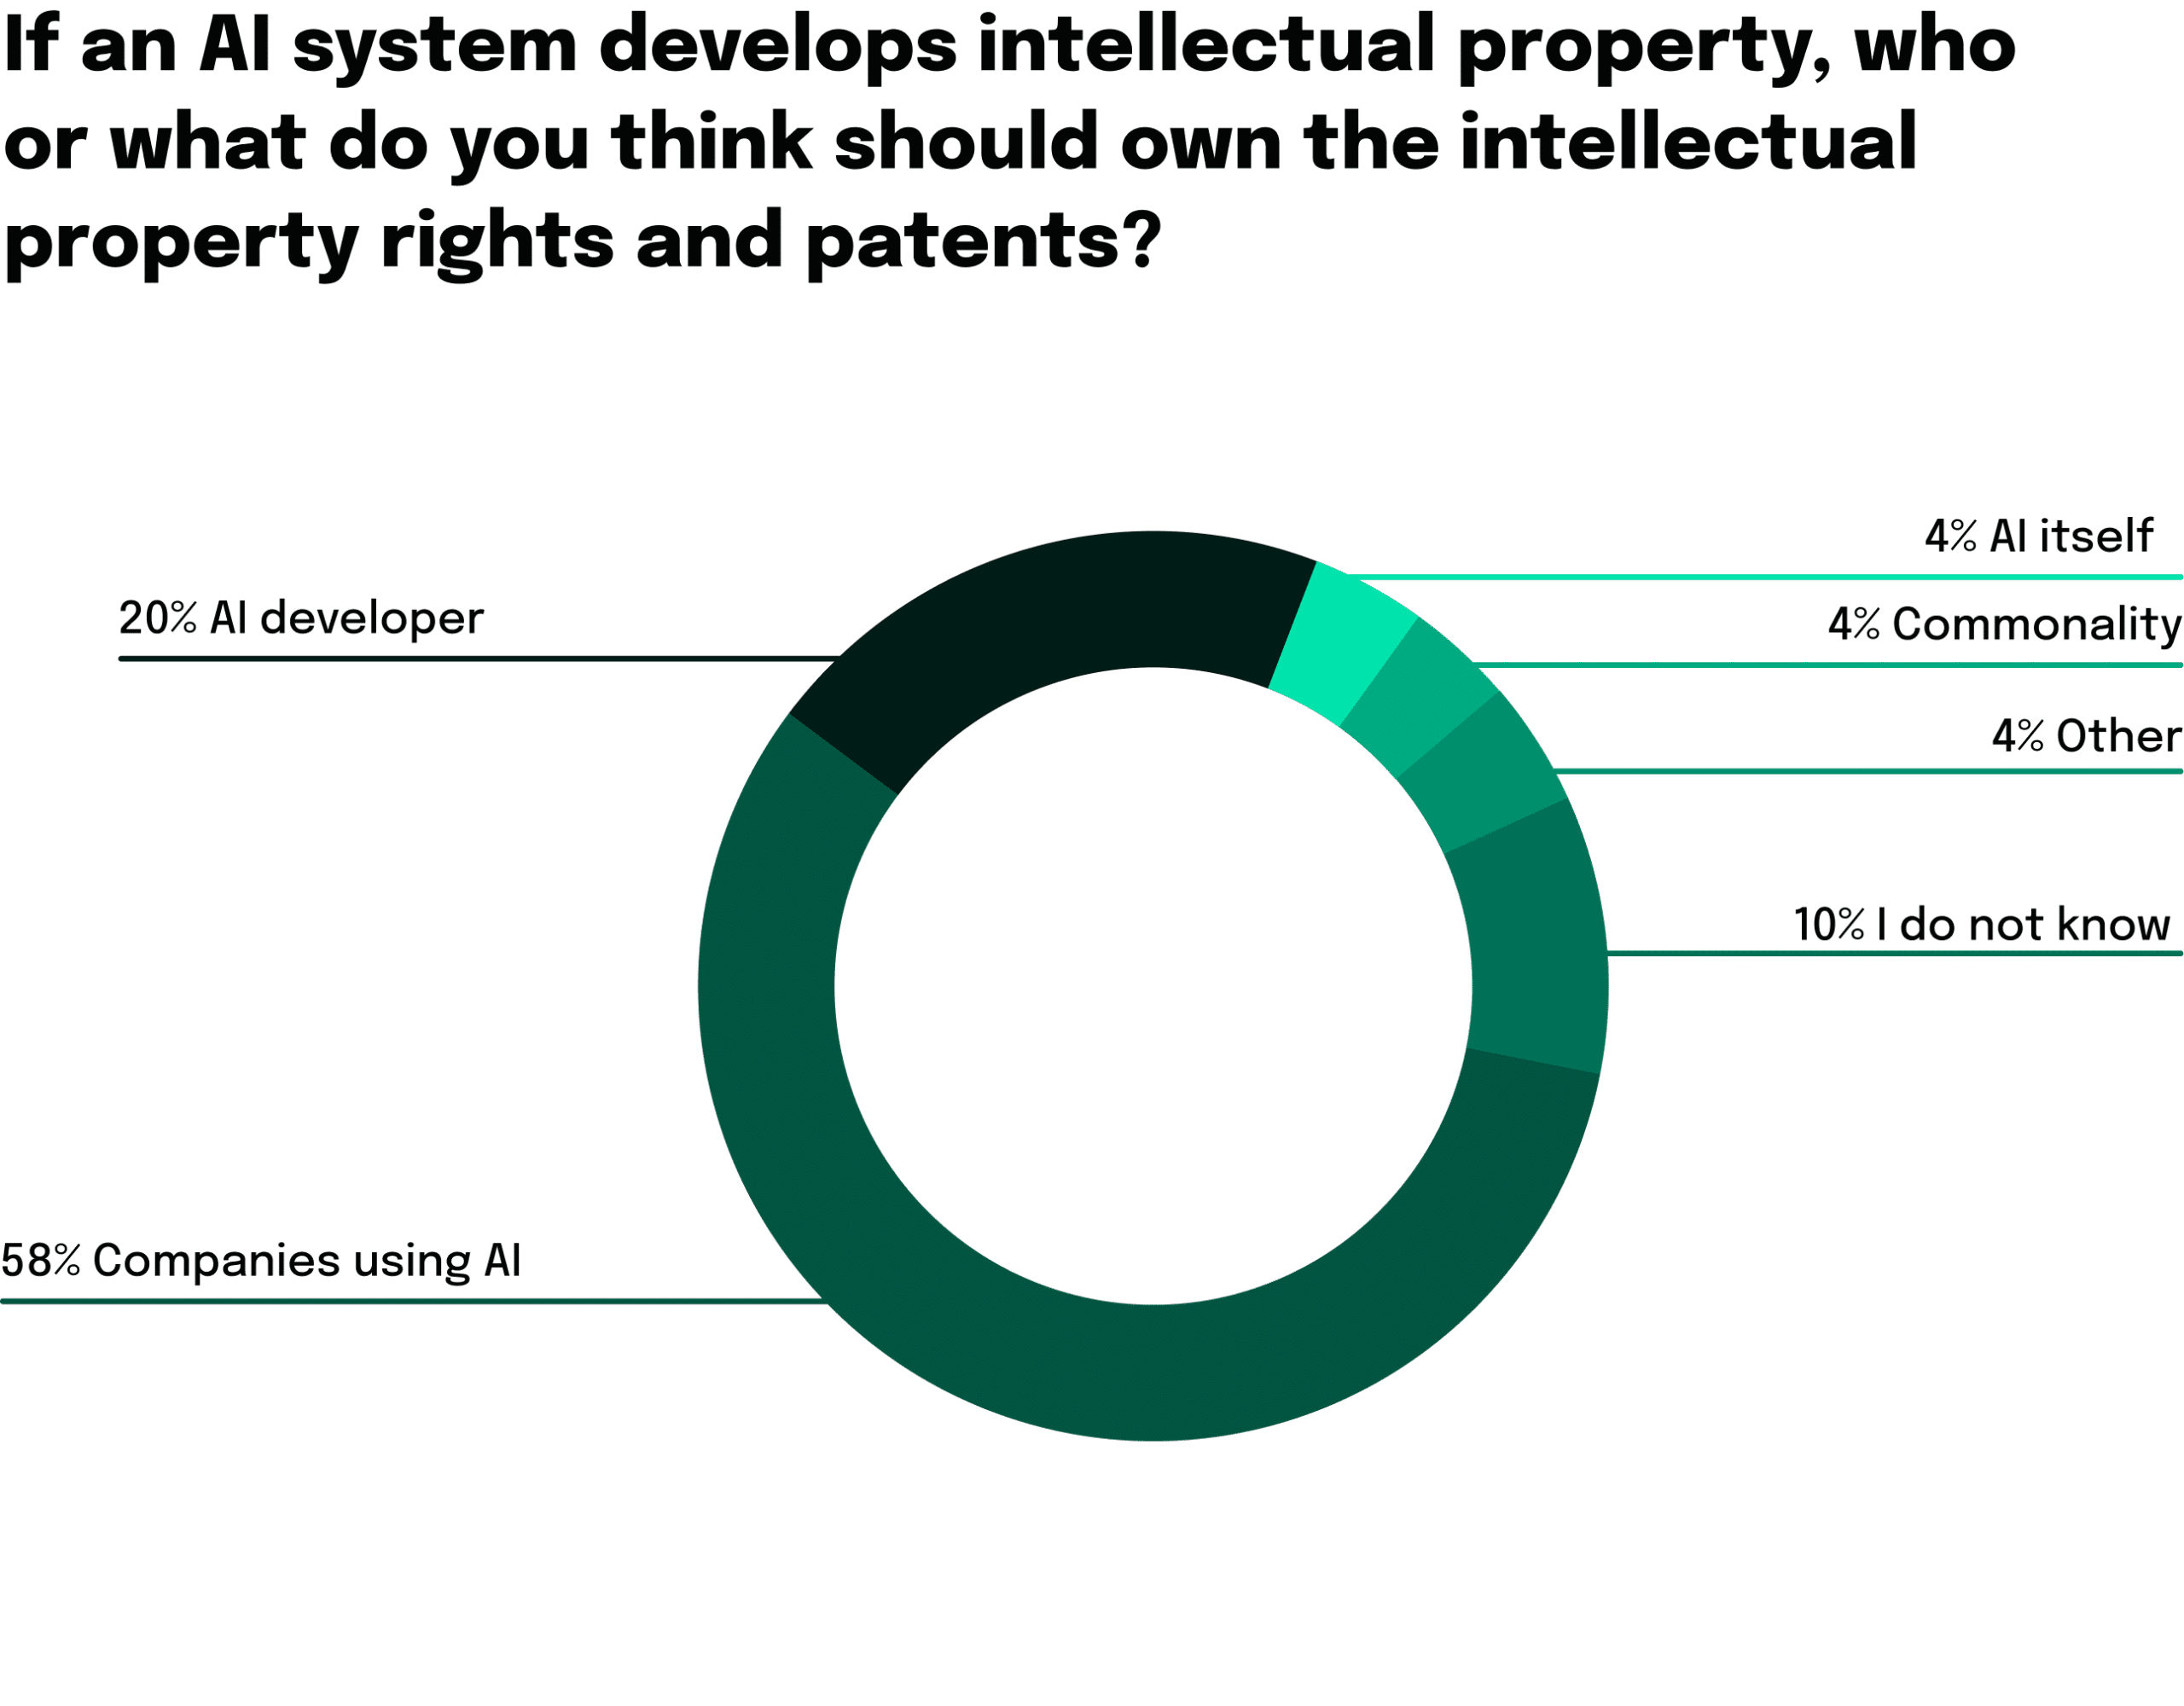 Graphic with the result of a survey about AI and intellectual property